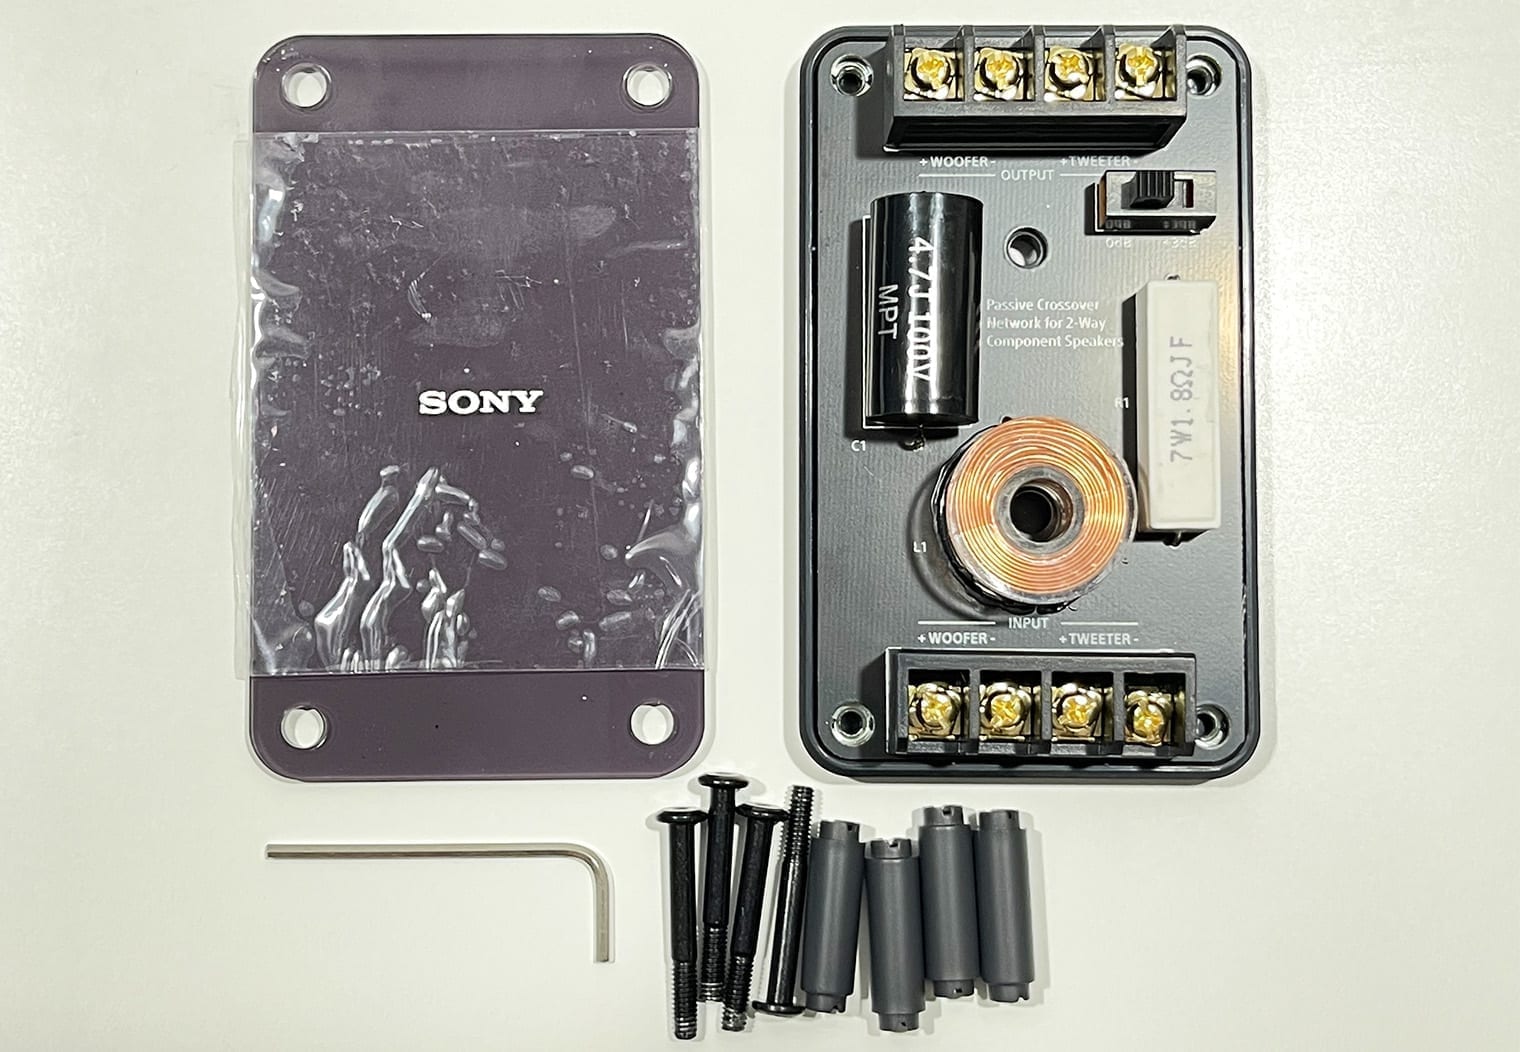 Sony XS-162ES disassembled